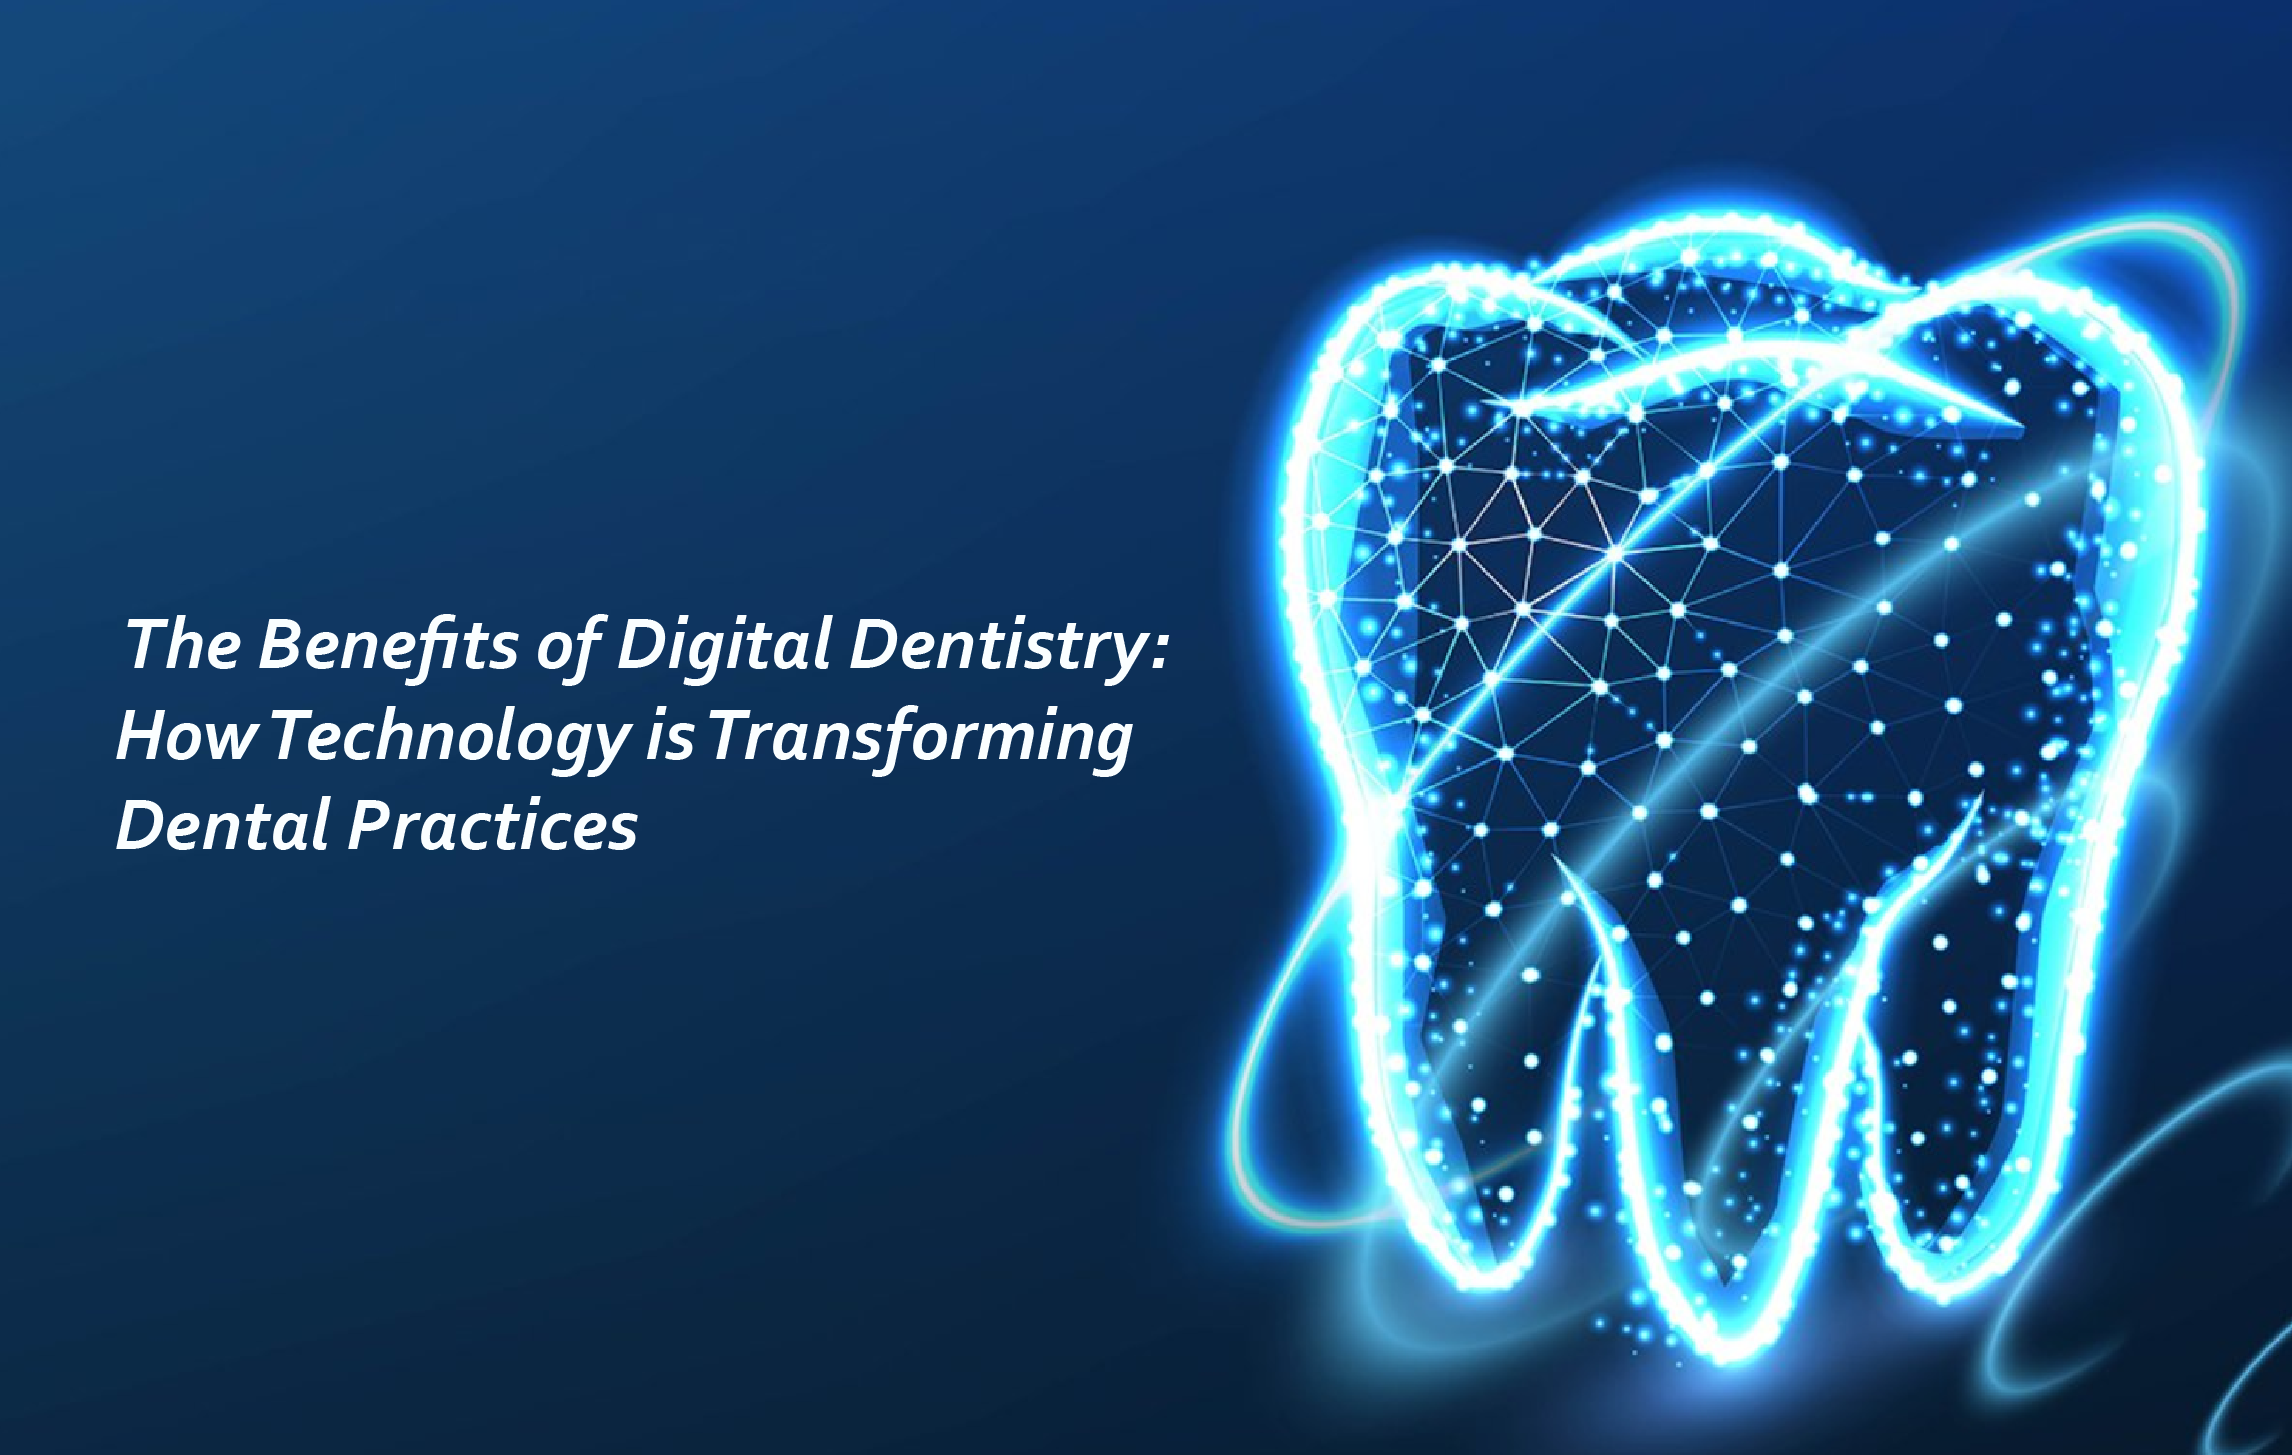 The Benefits of Digital Dentistry: How Technology is Transforming Dental Practices